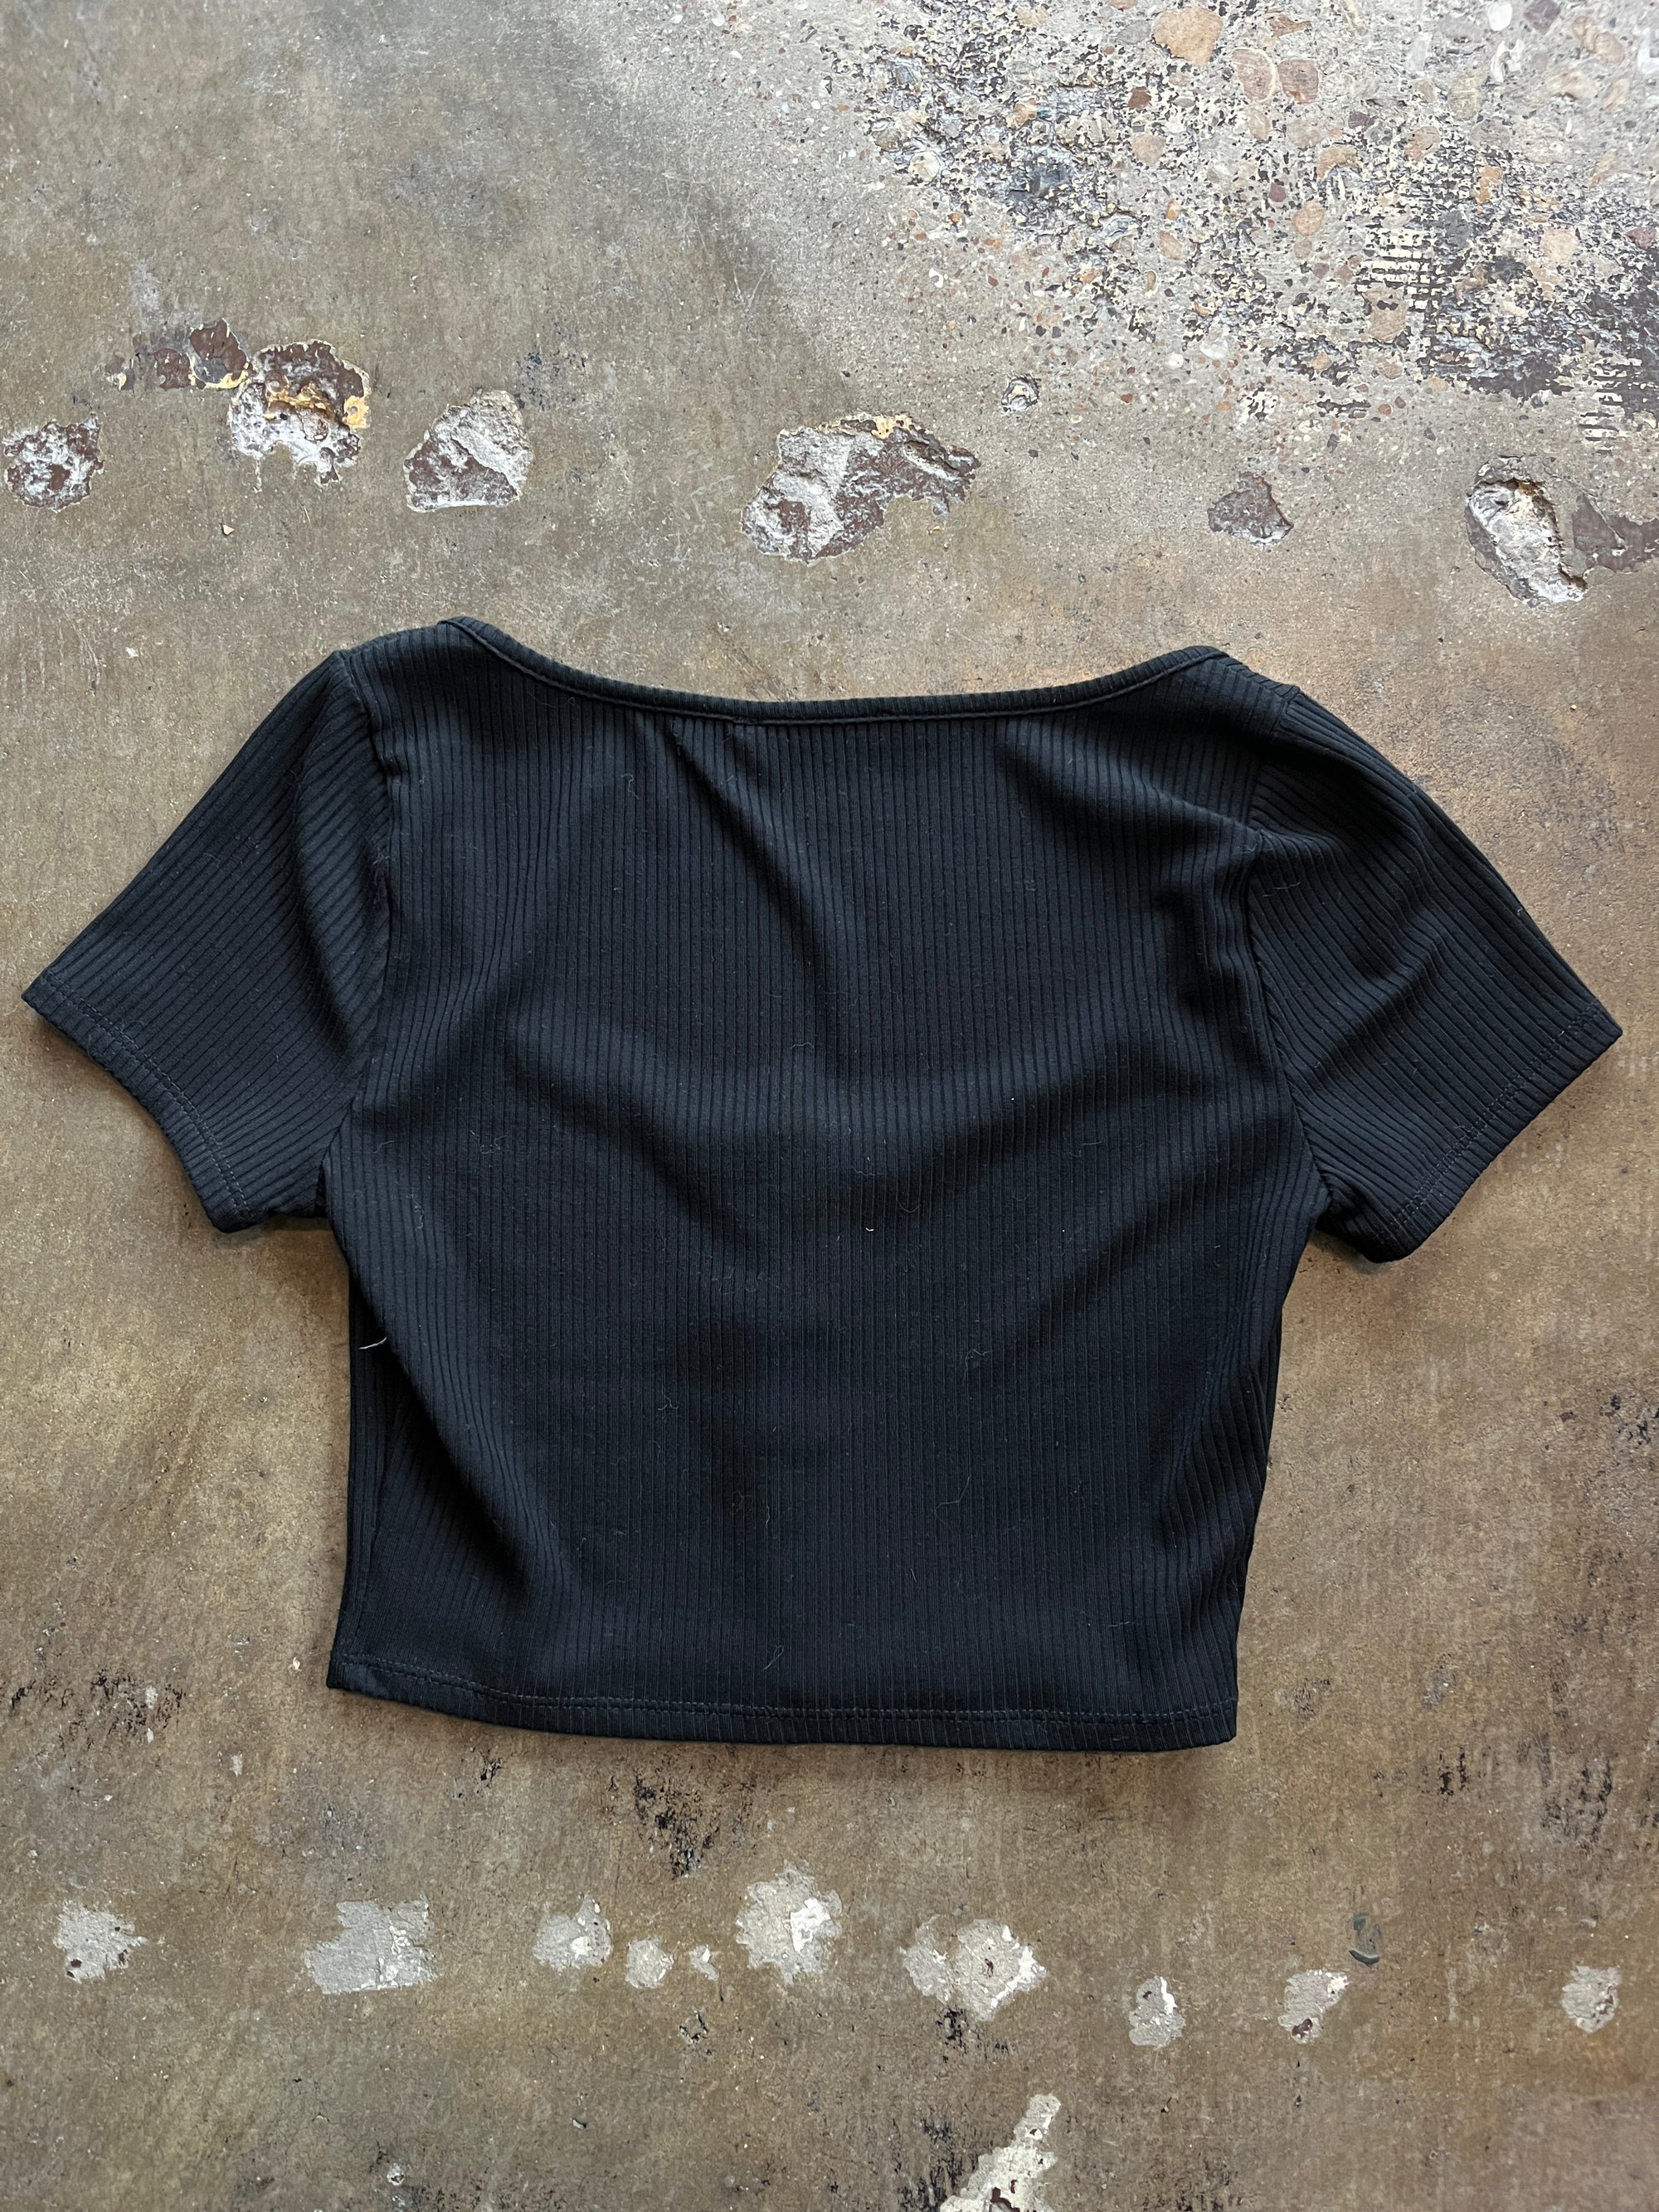 Reformation Black Button Front Ribbed Crop Top